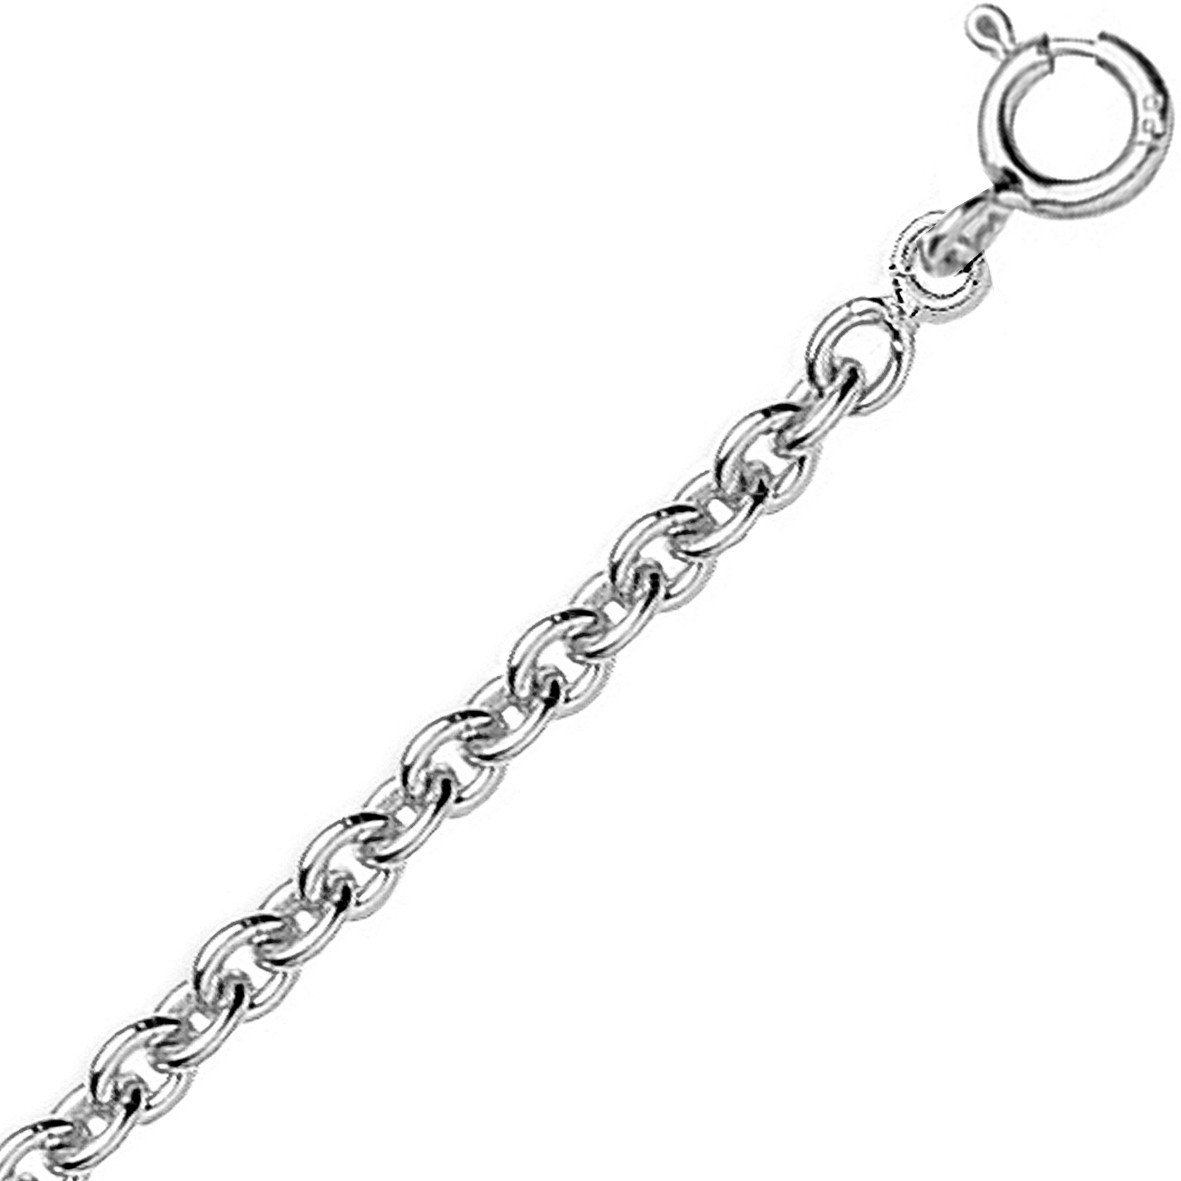 Chaine or blanc 18k maille forçat ronde 1,75mm